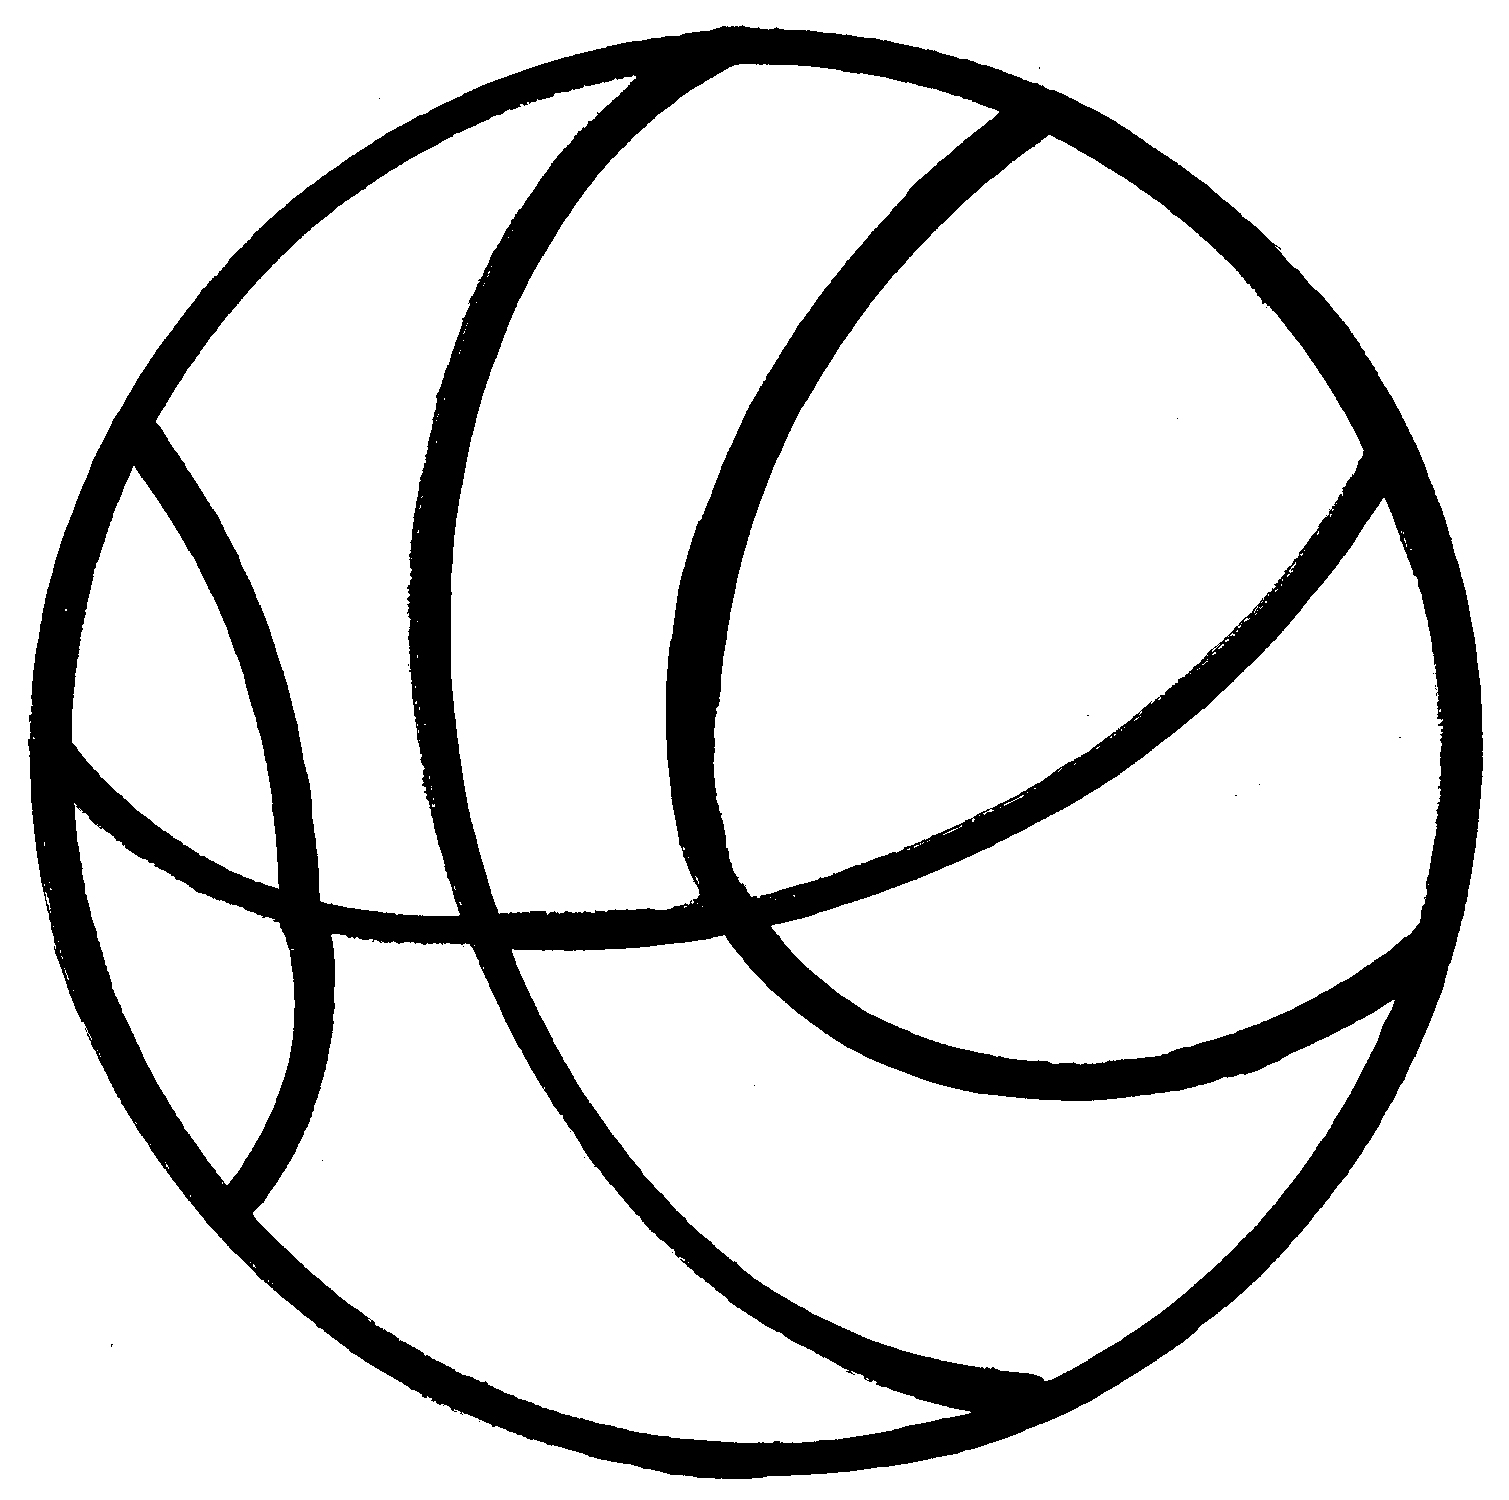 Basketball clip art free basketball clipart to use for party